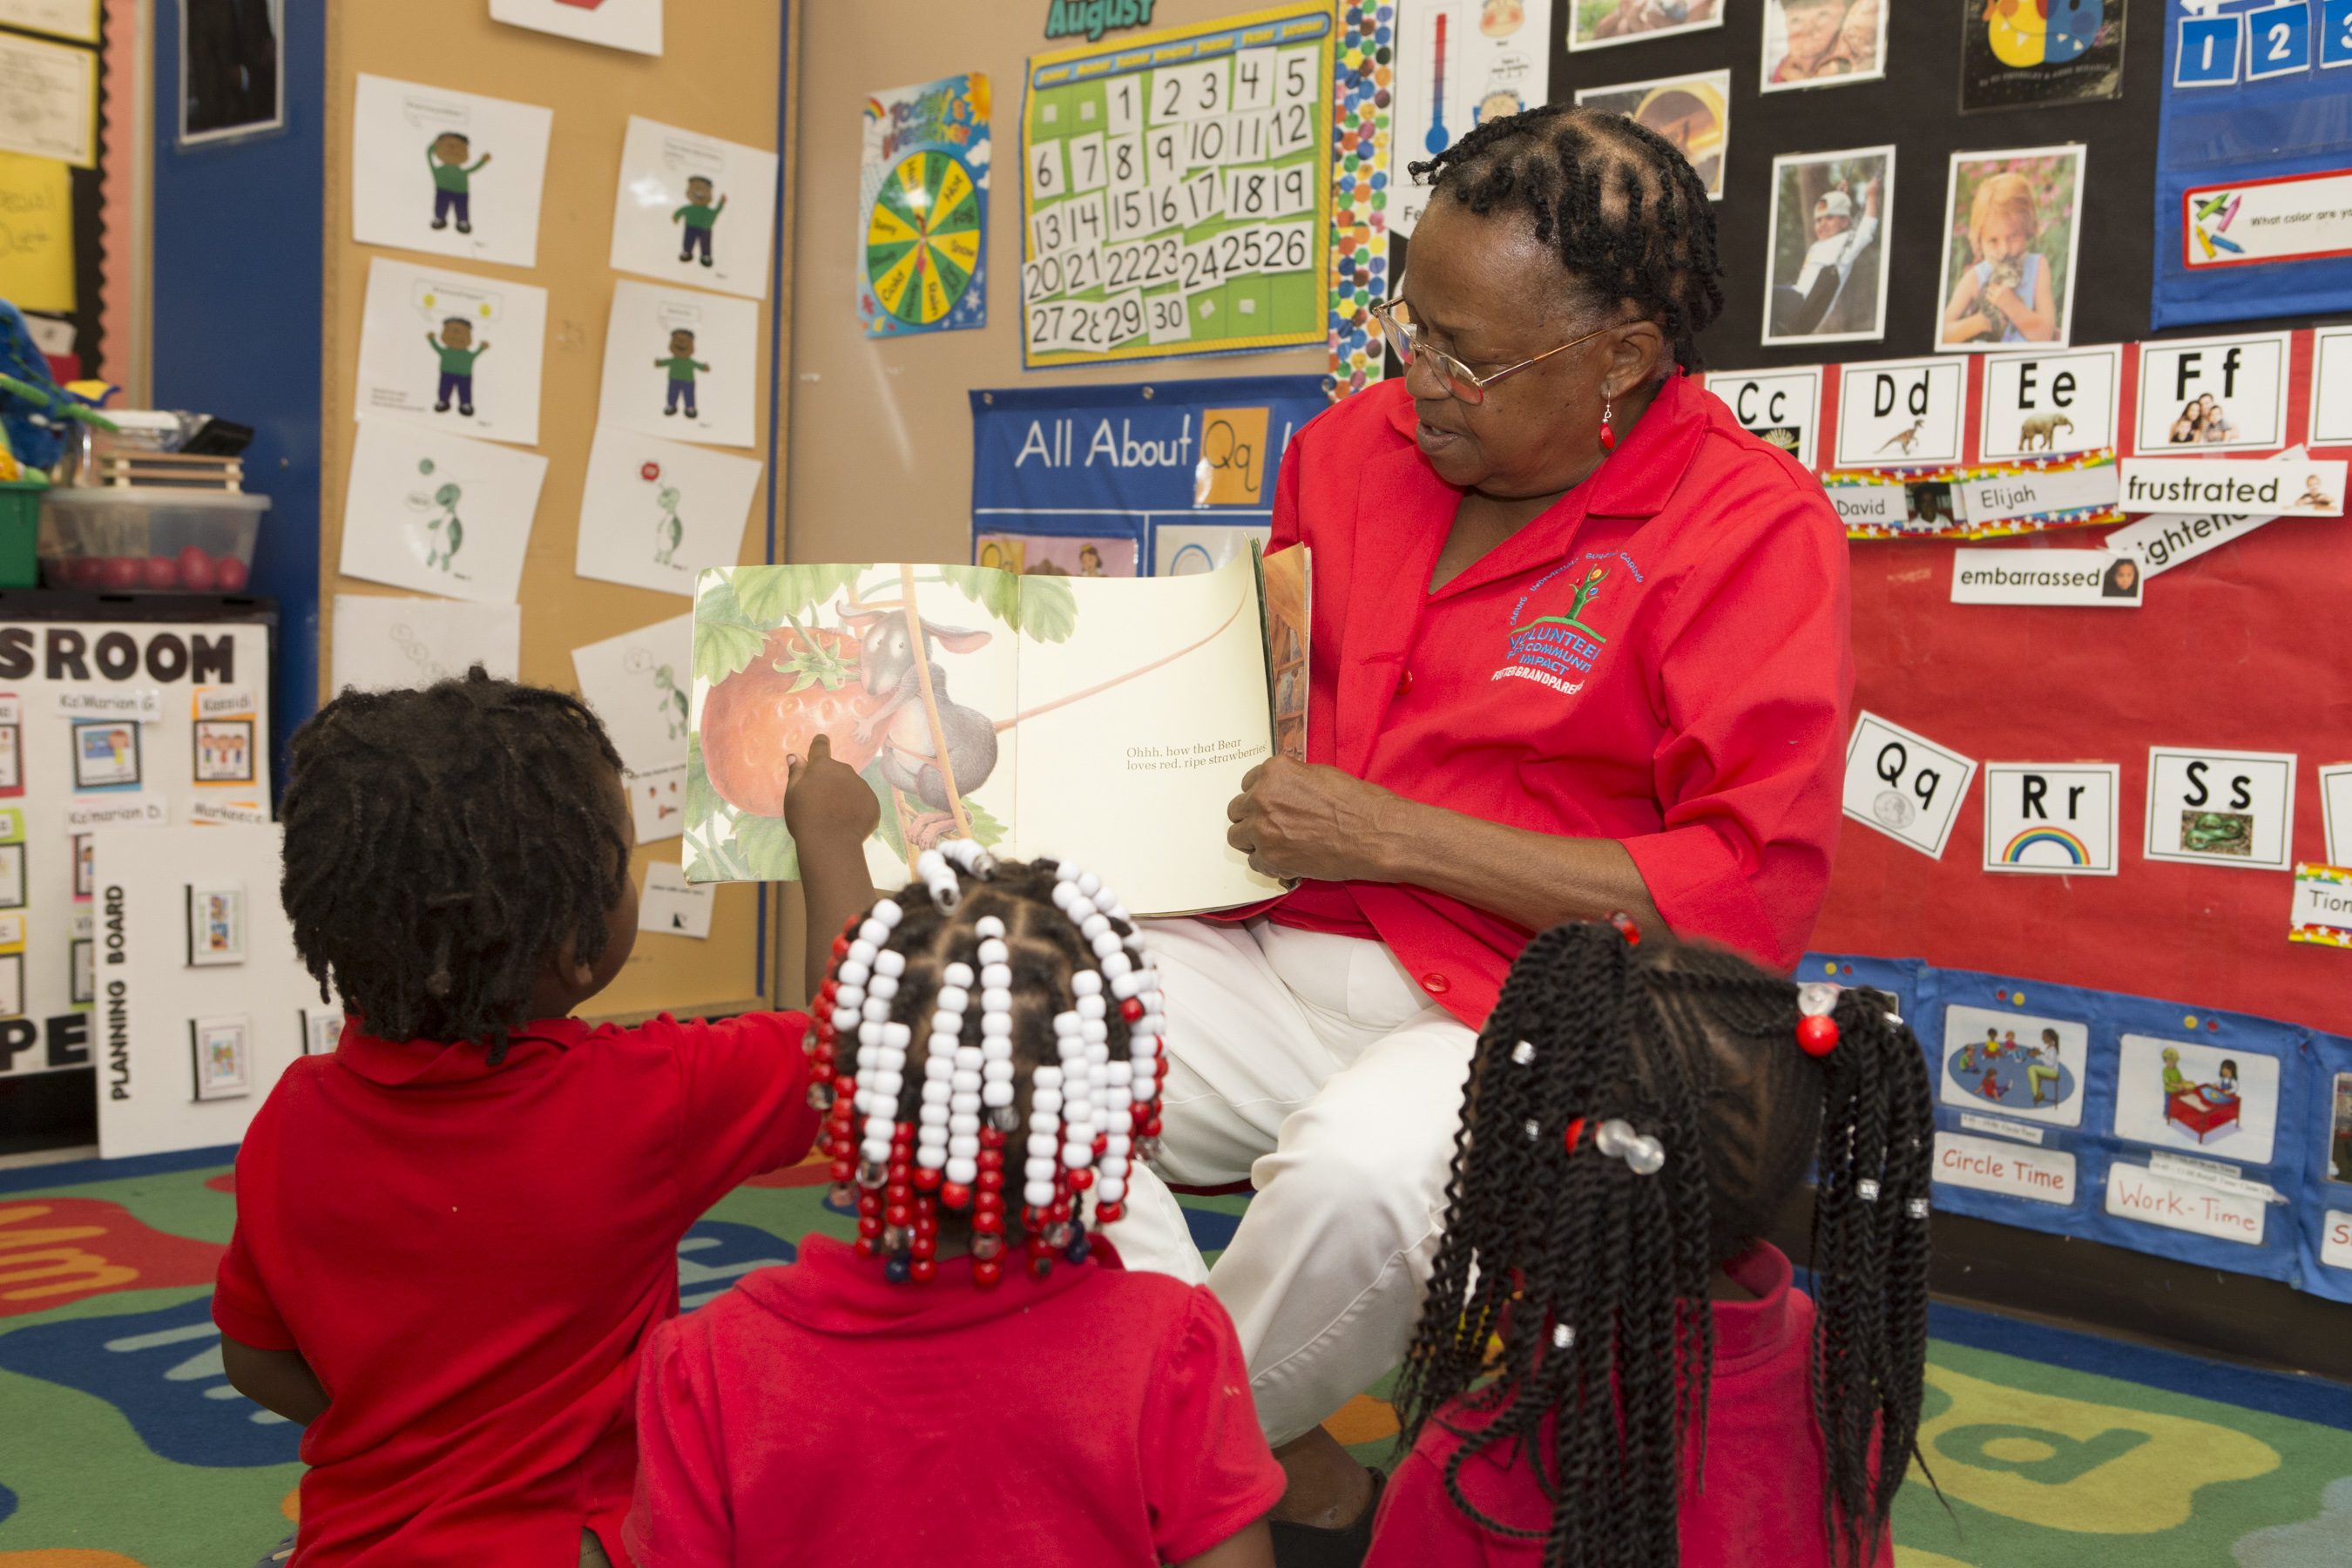 A woman is reading a picture book to young children sitting on the floor of a classroom.